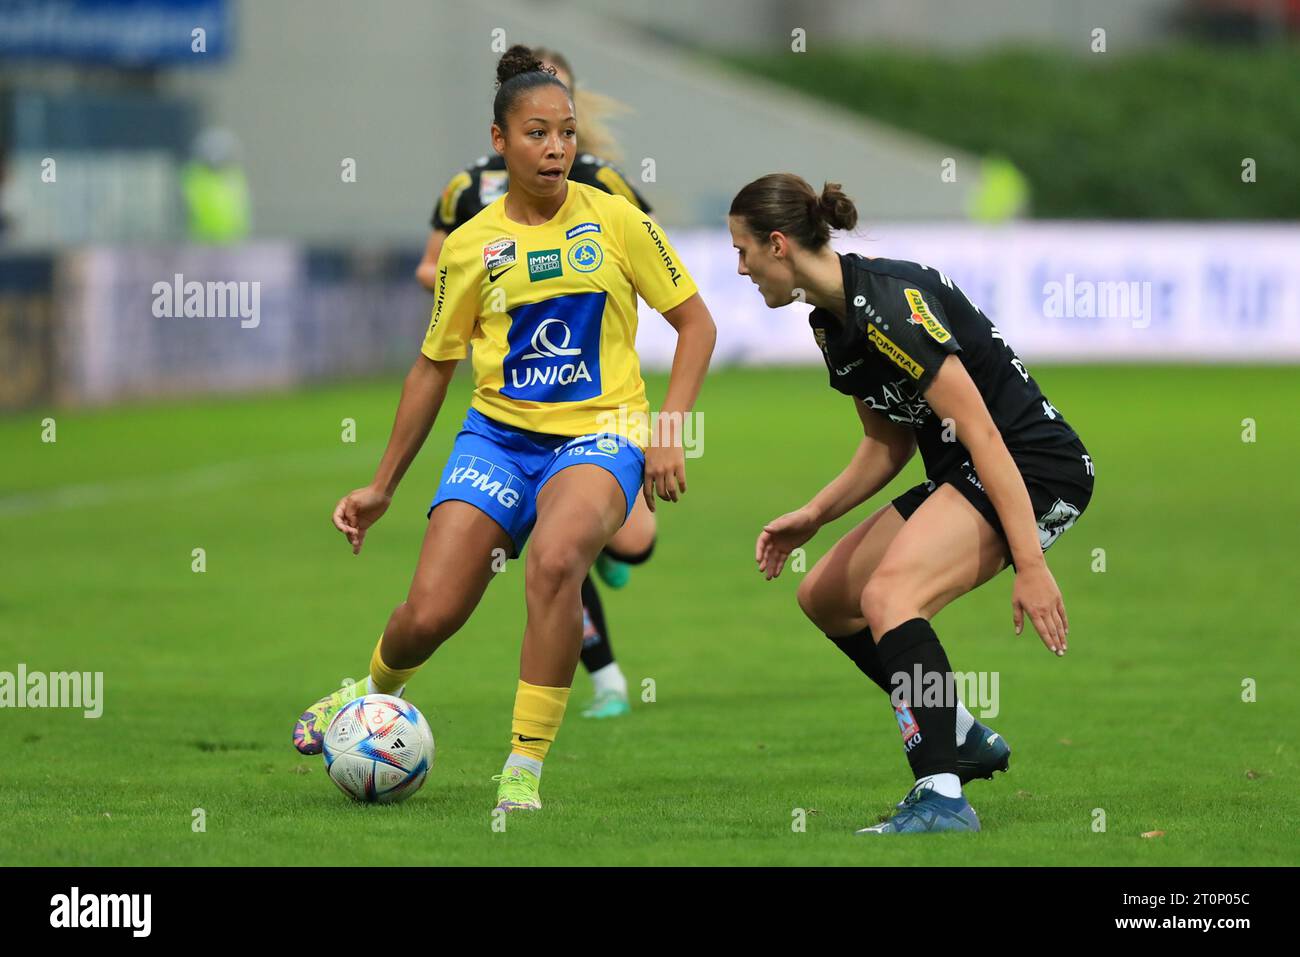 Nicole Ojukwu (19 First Vienna FC) considering her options during the Admiral Frauen Bundesliga match First Vienna FC vs SCR Altach at Hohe Warte  (Tom Seiss/ SPP) Stock Photo